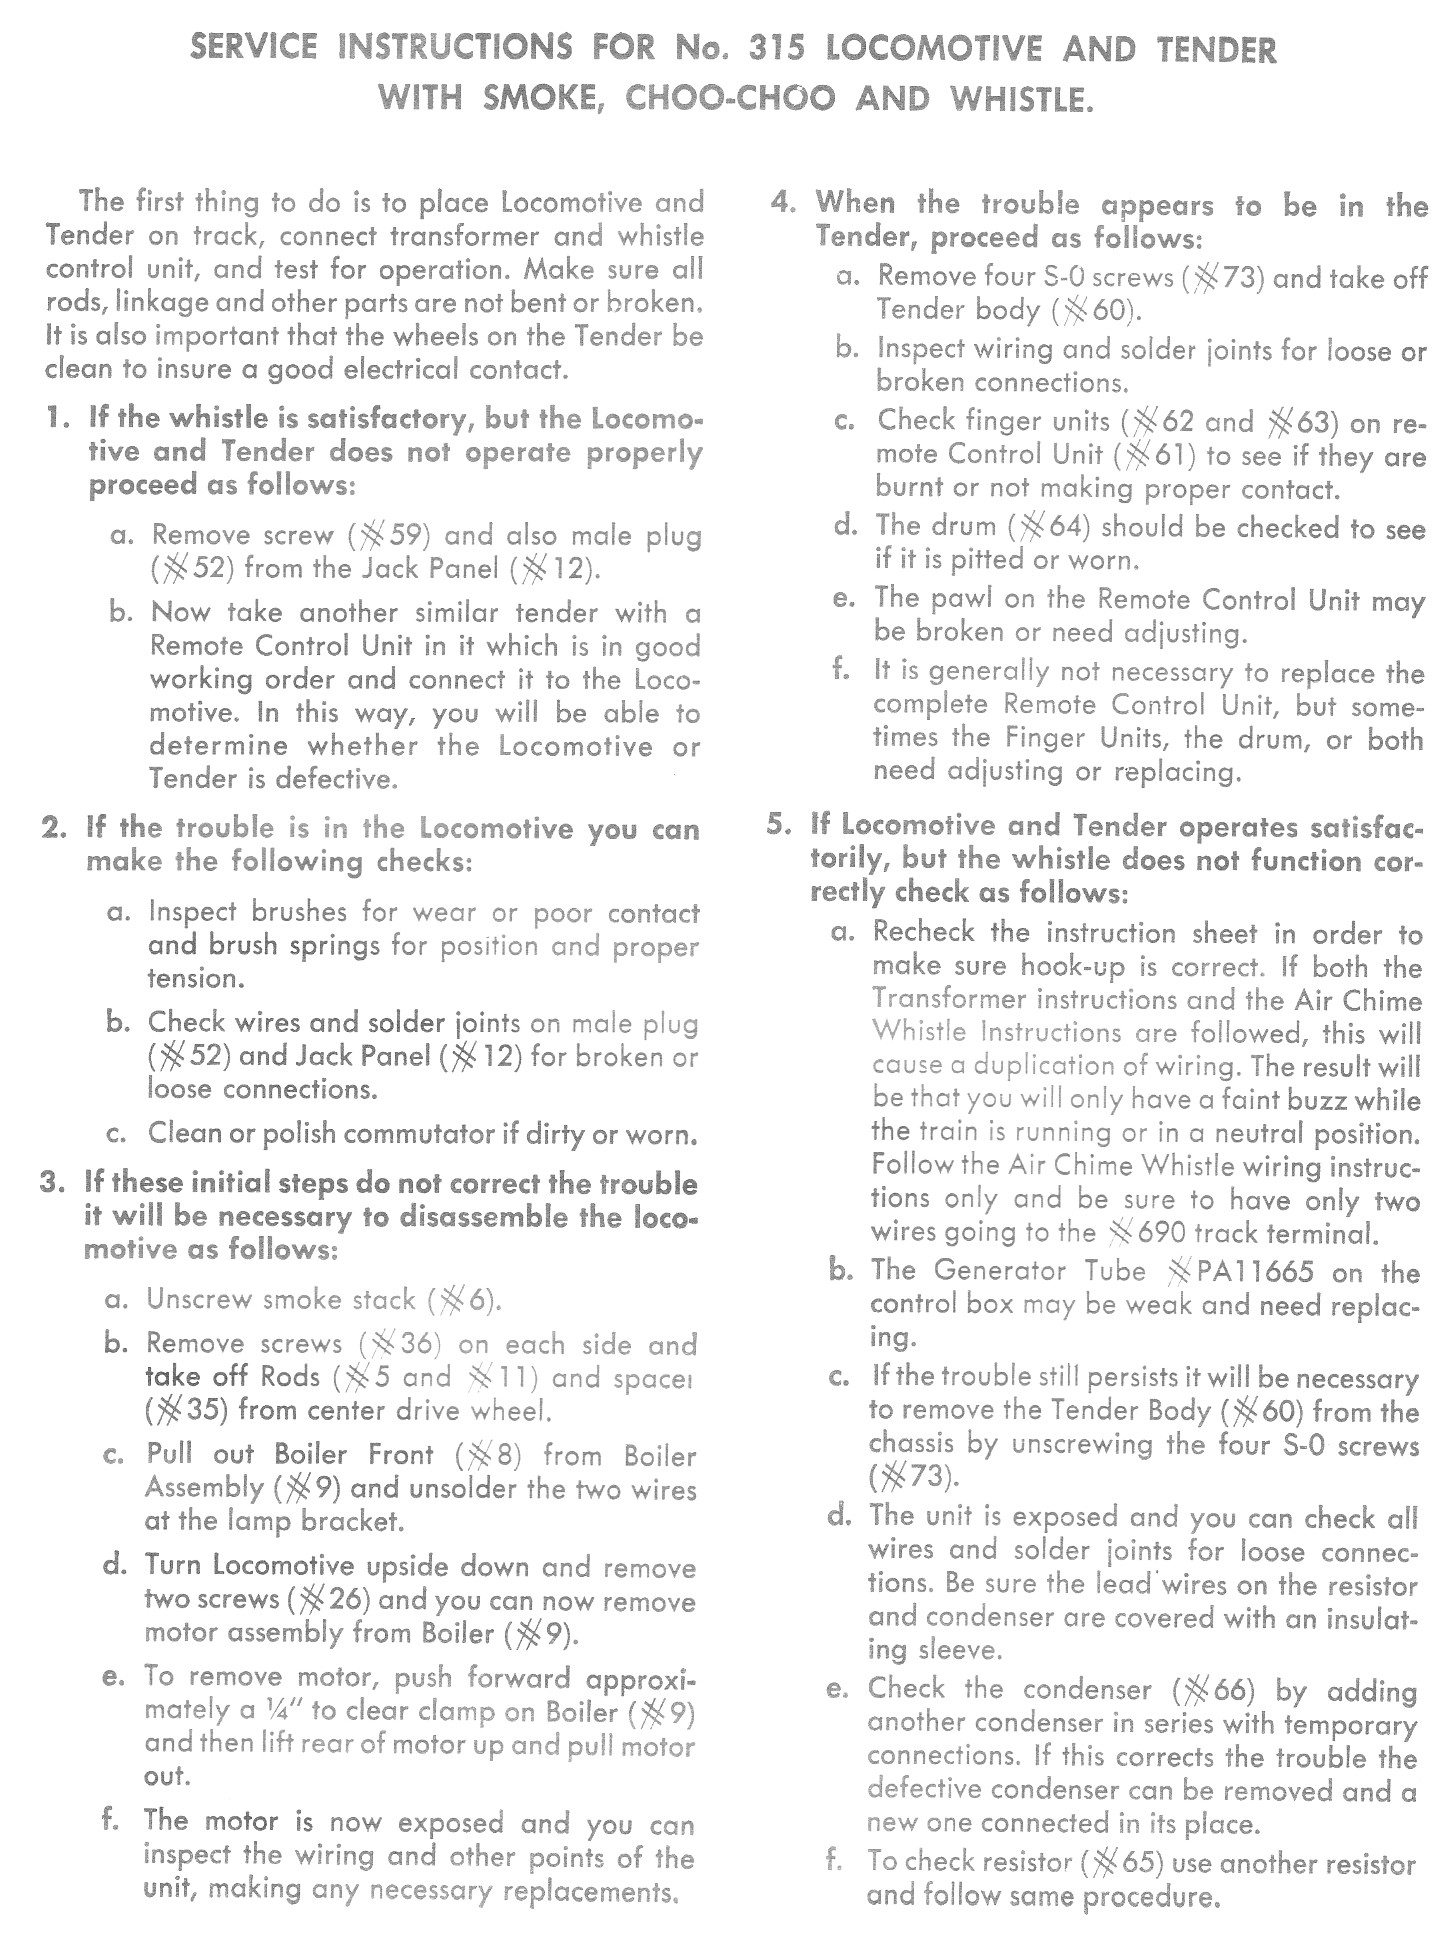 Service Instructions for No. 315 Locomotive and Tender